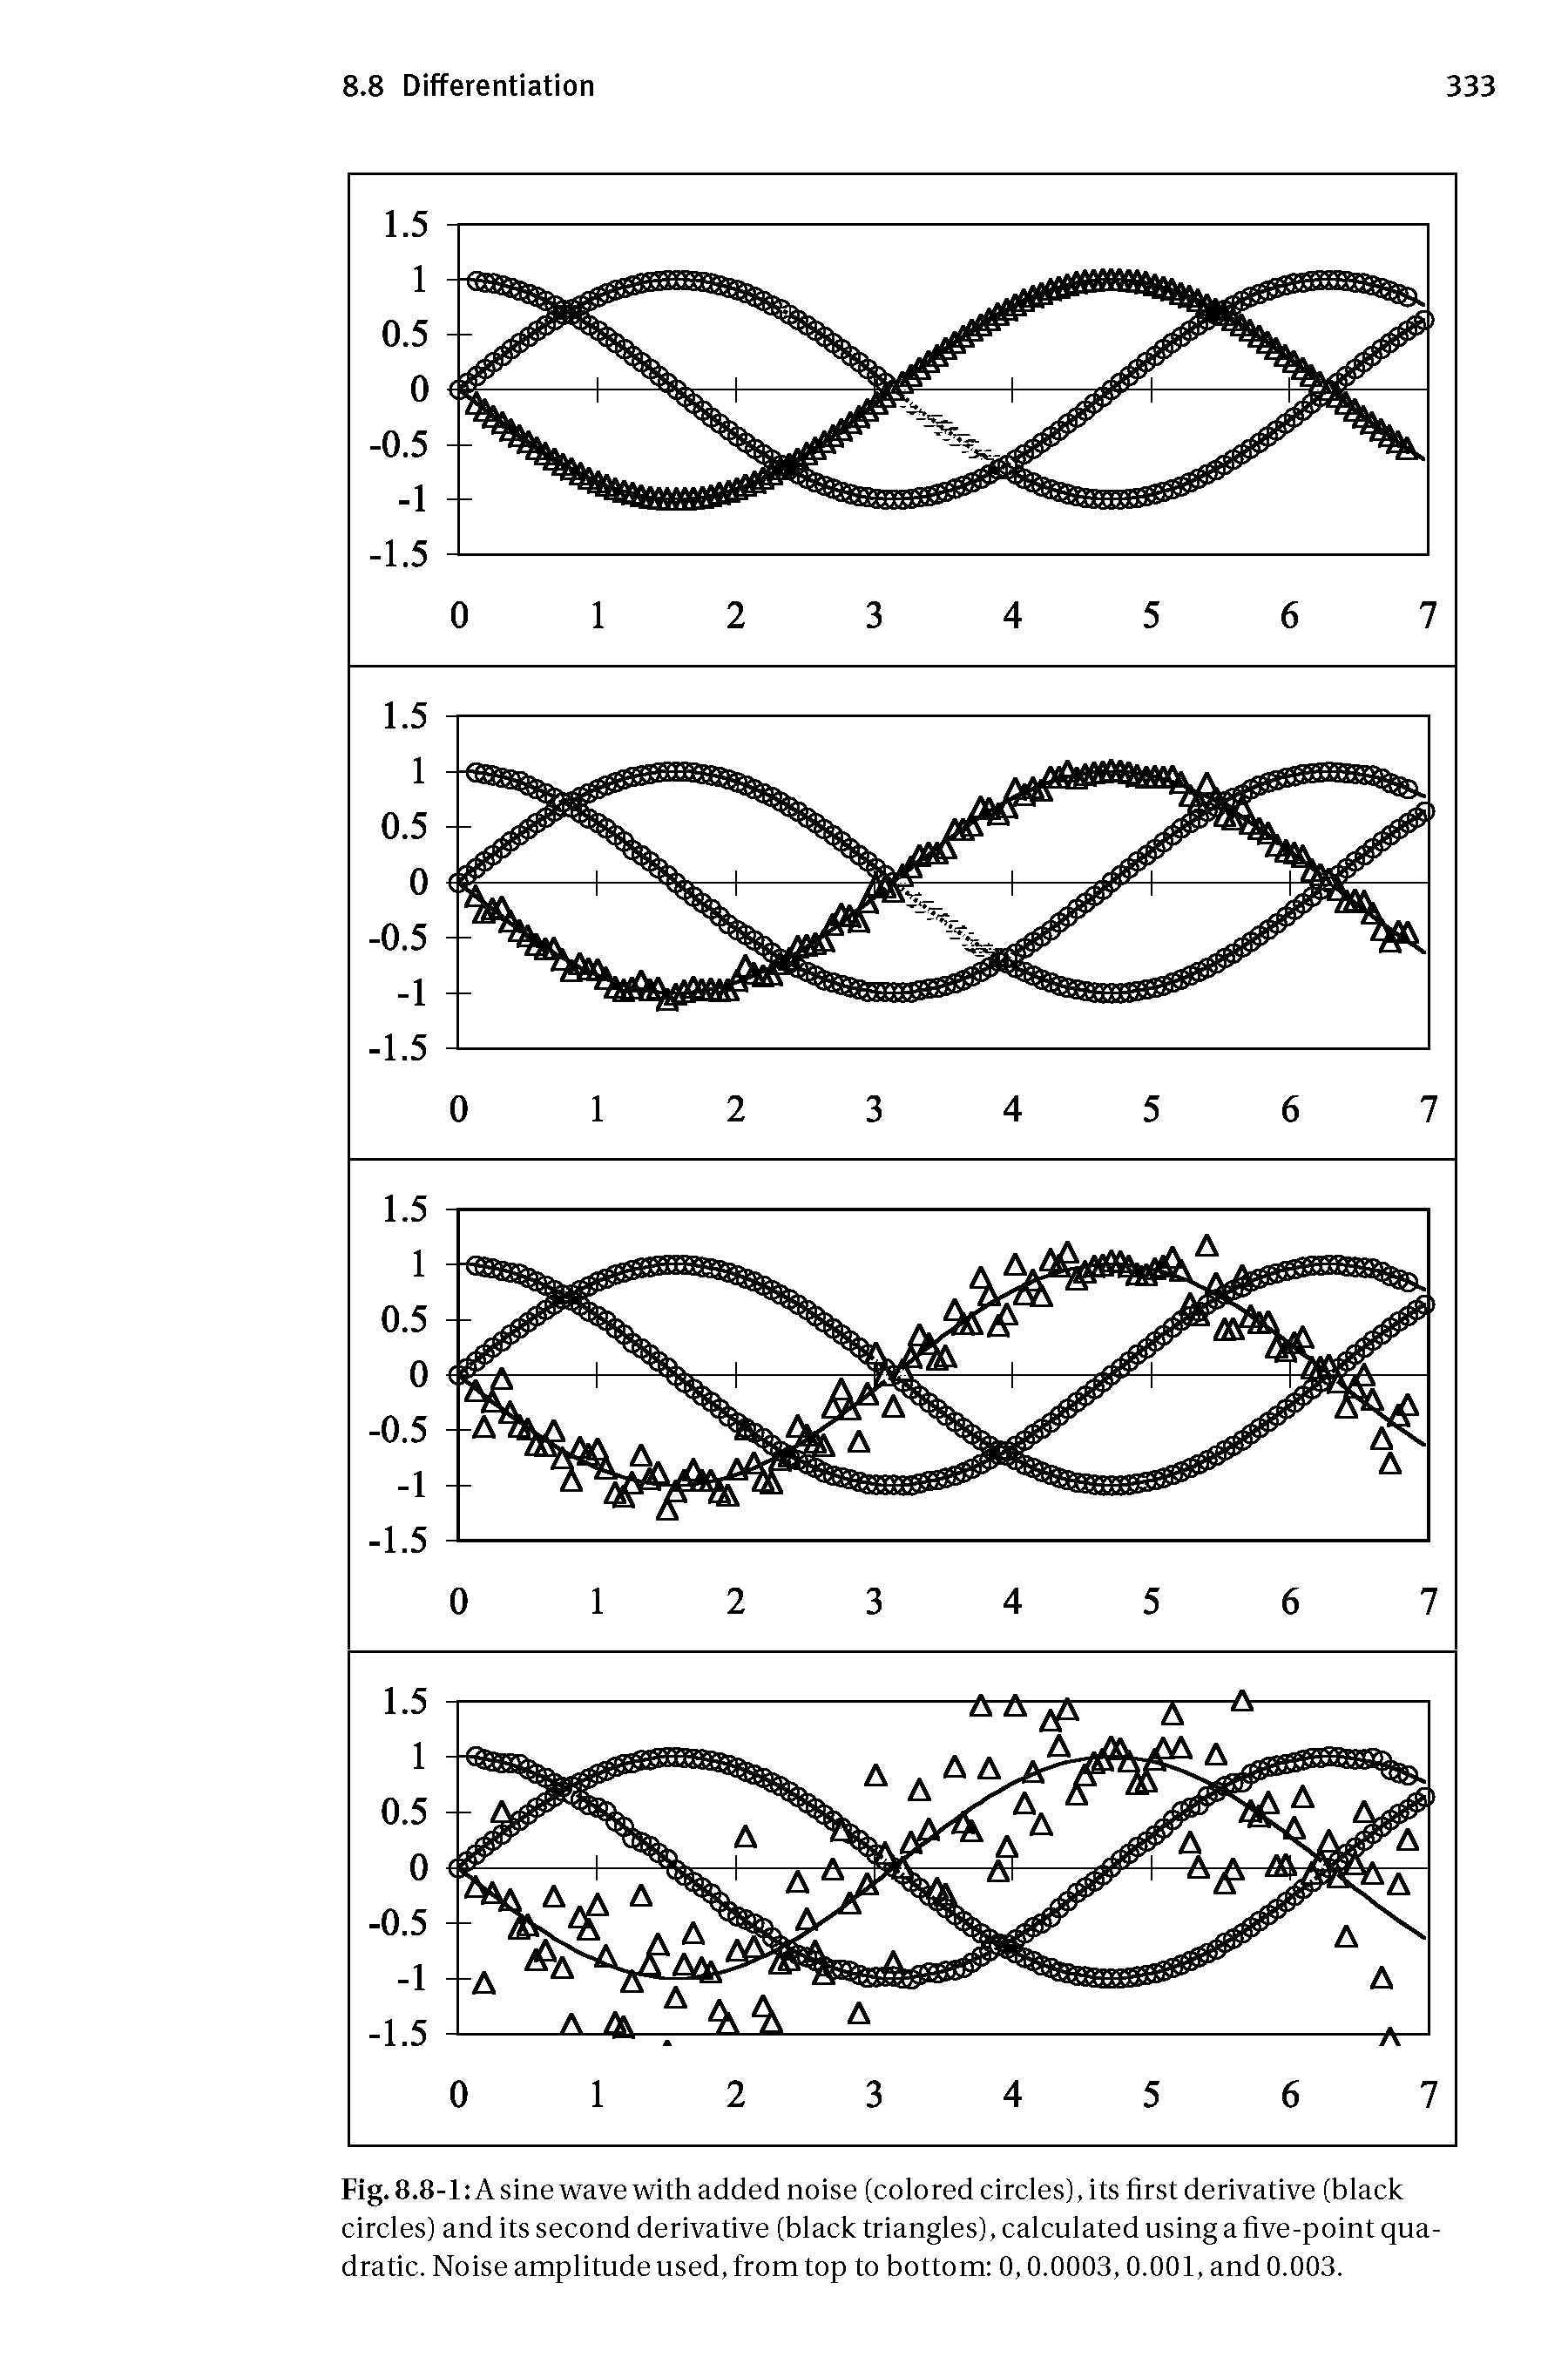 Fig. 8.8-1 A sine wave with added noise (colored circles), its first derivative (black circles) and its second derivative (black triangles), calculated using a five-point quadratic. Noise amplitude used, from top to bottom 0,0.0003,0.001, and 0.003.